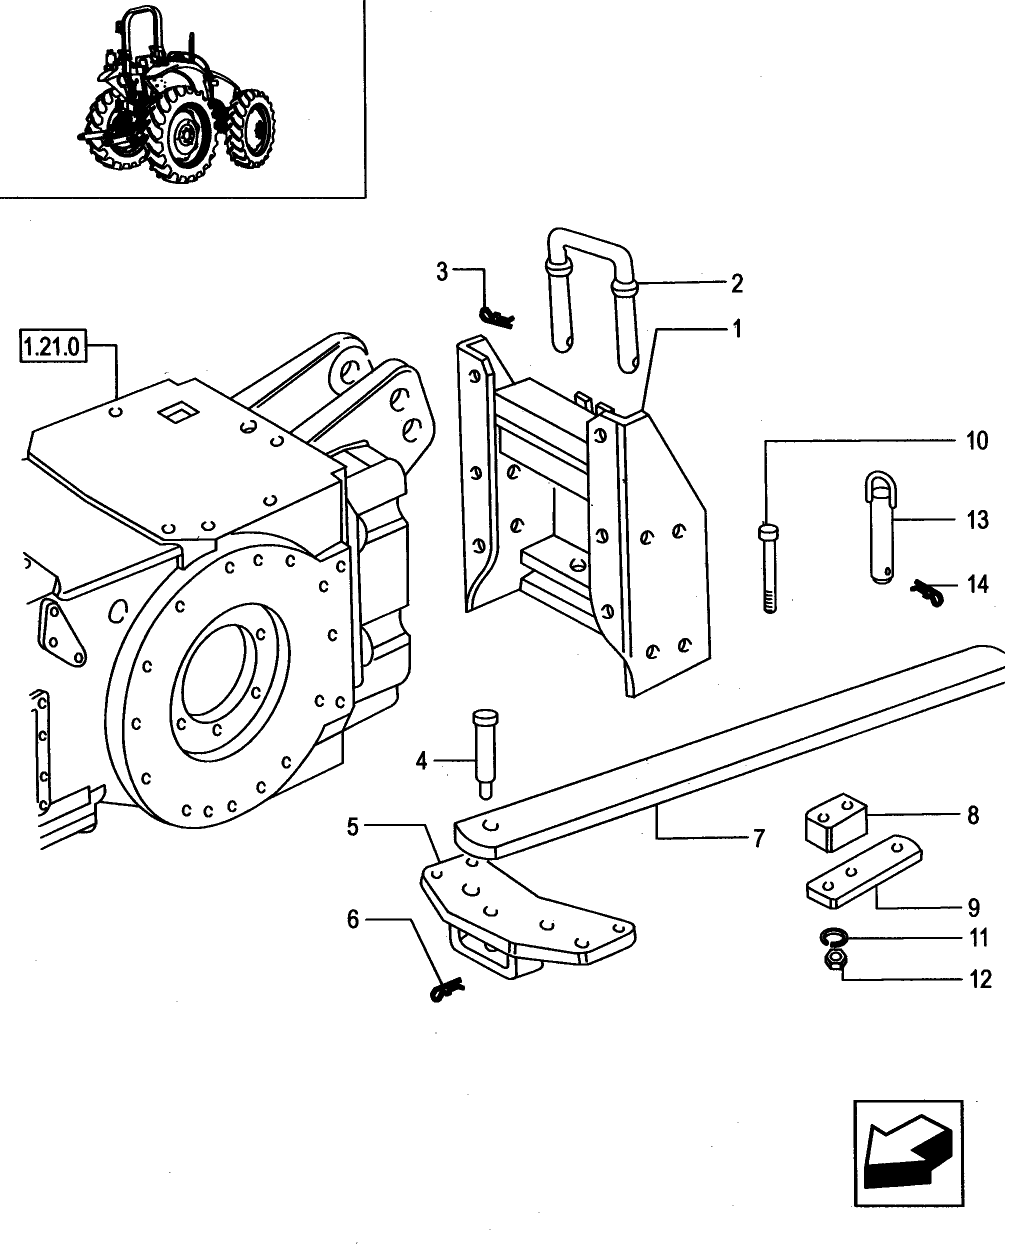 1.89.0/03(01) (VAR.912) DRAWBAR AND SUPPORT WITH PIN (HOLE DIAMETER 33 MM)